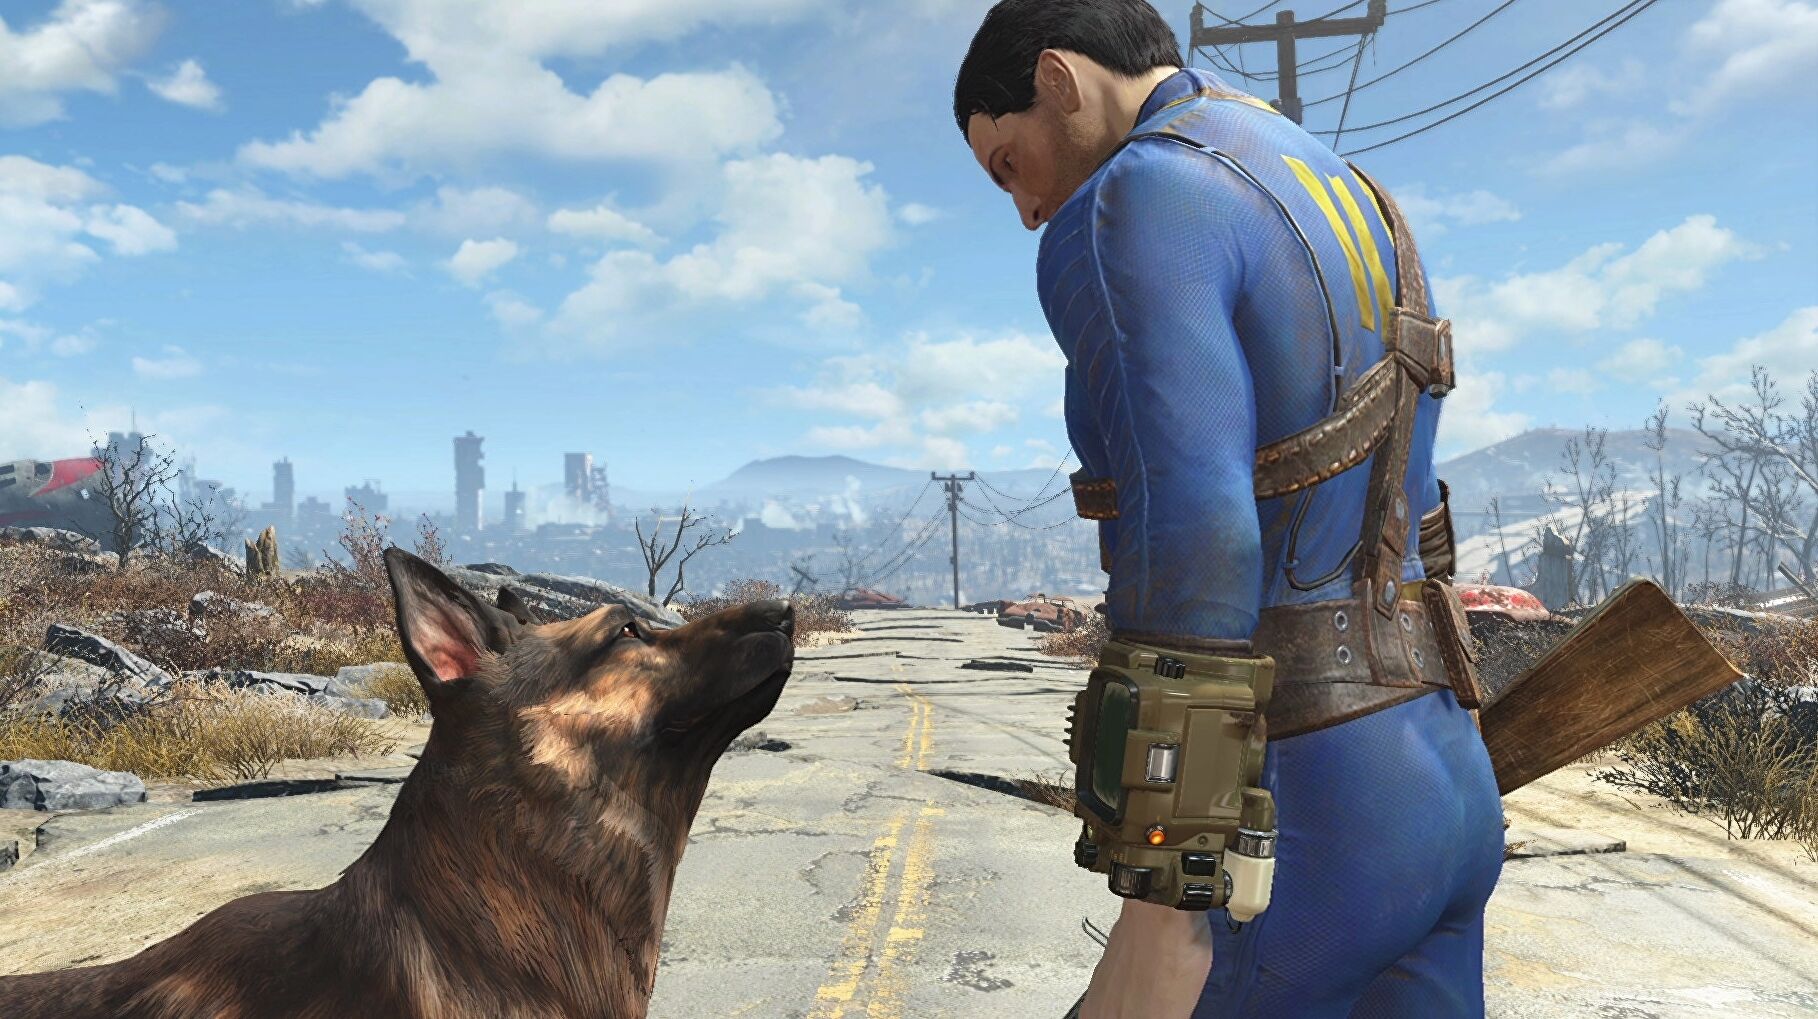 Image for Bethesda confirms Fallout 5 will be its next game after The Elder Scrolls 6